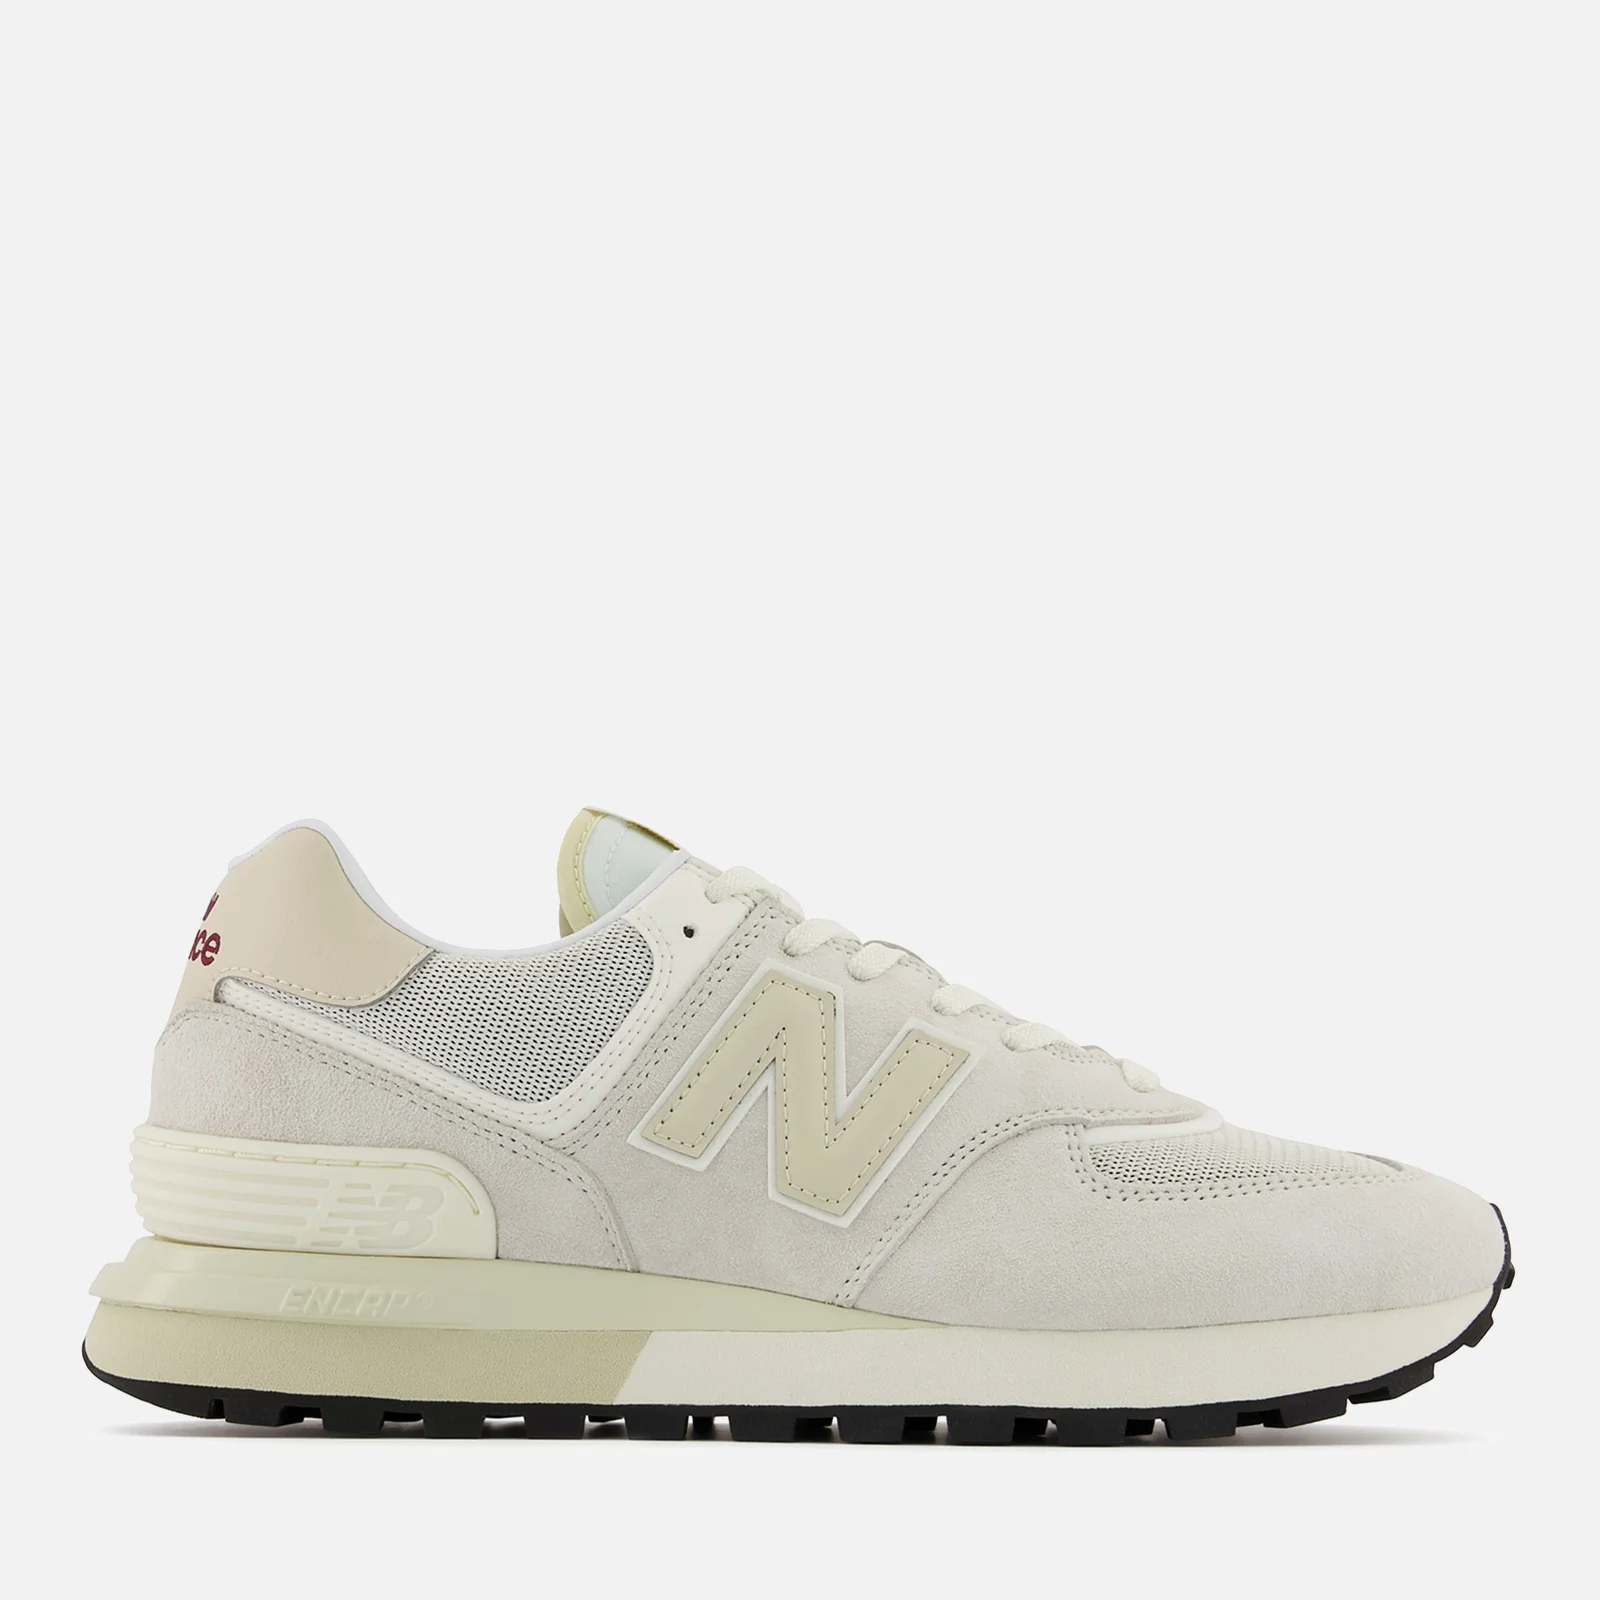 New Balance 574 Legacy Trainers - Silver Birch Image 1